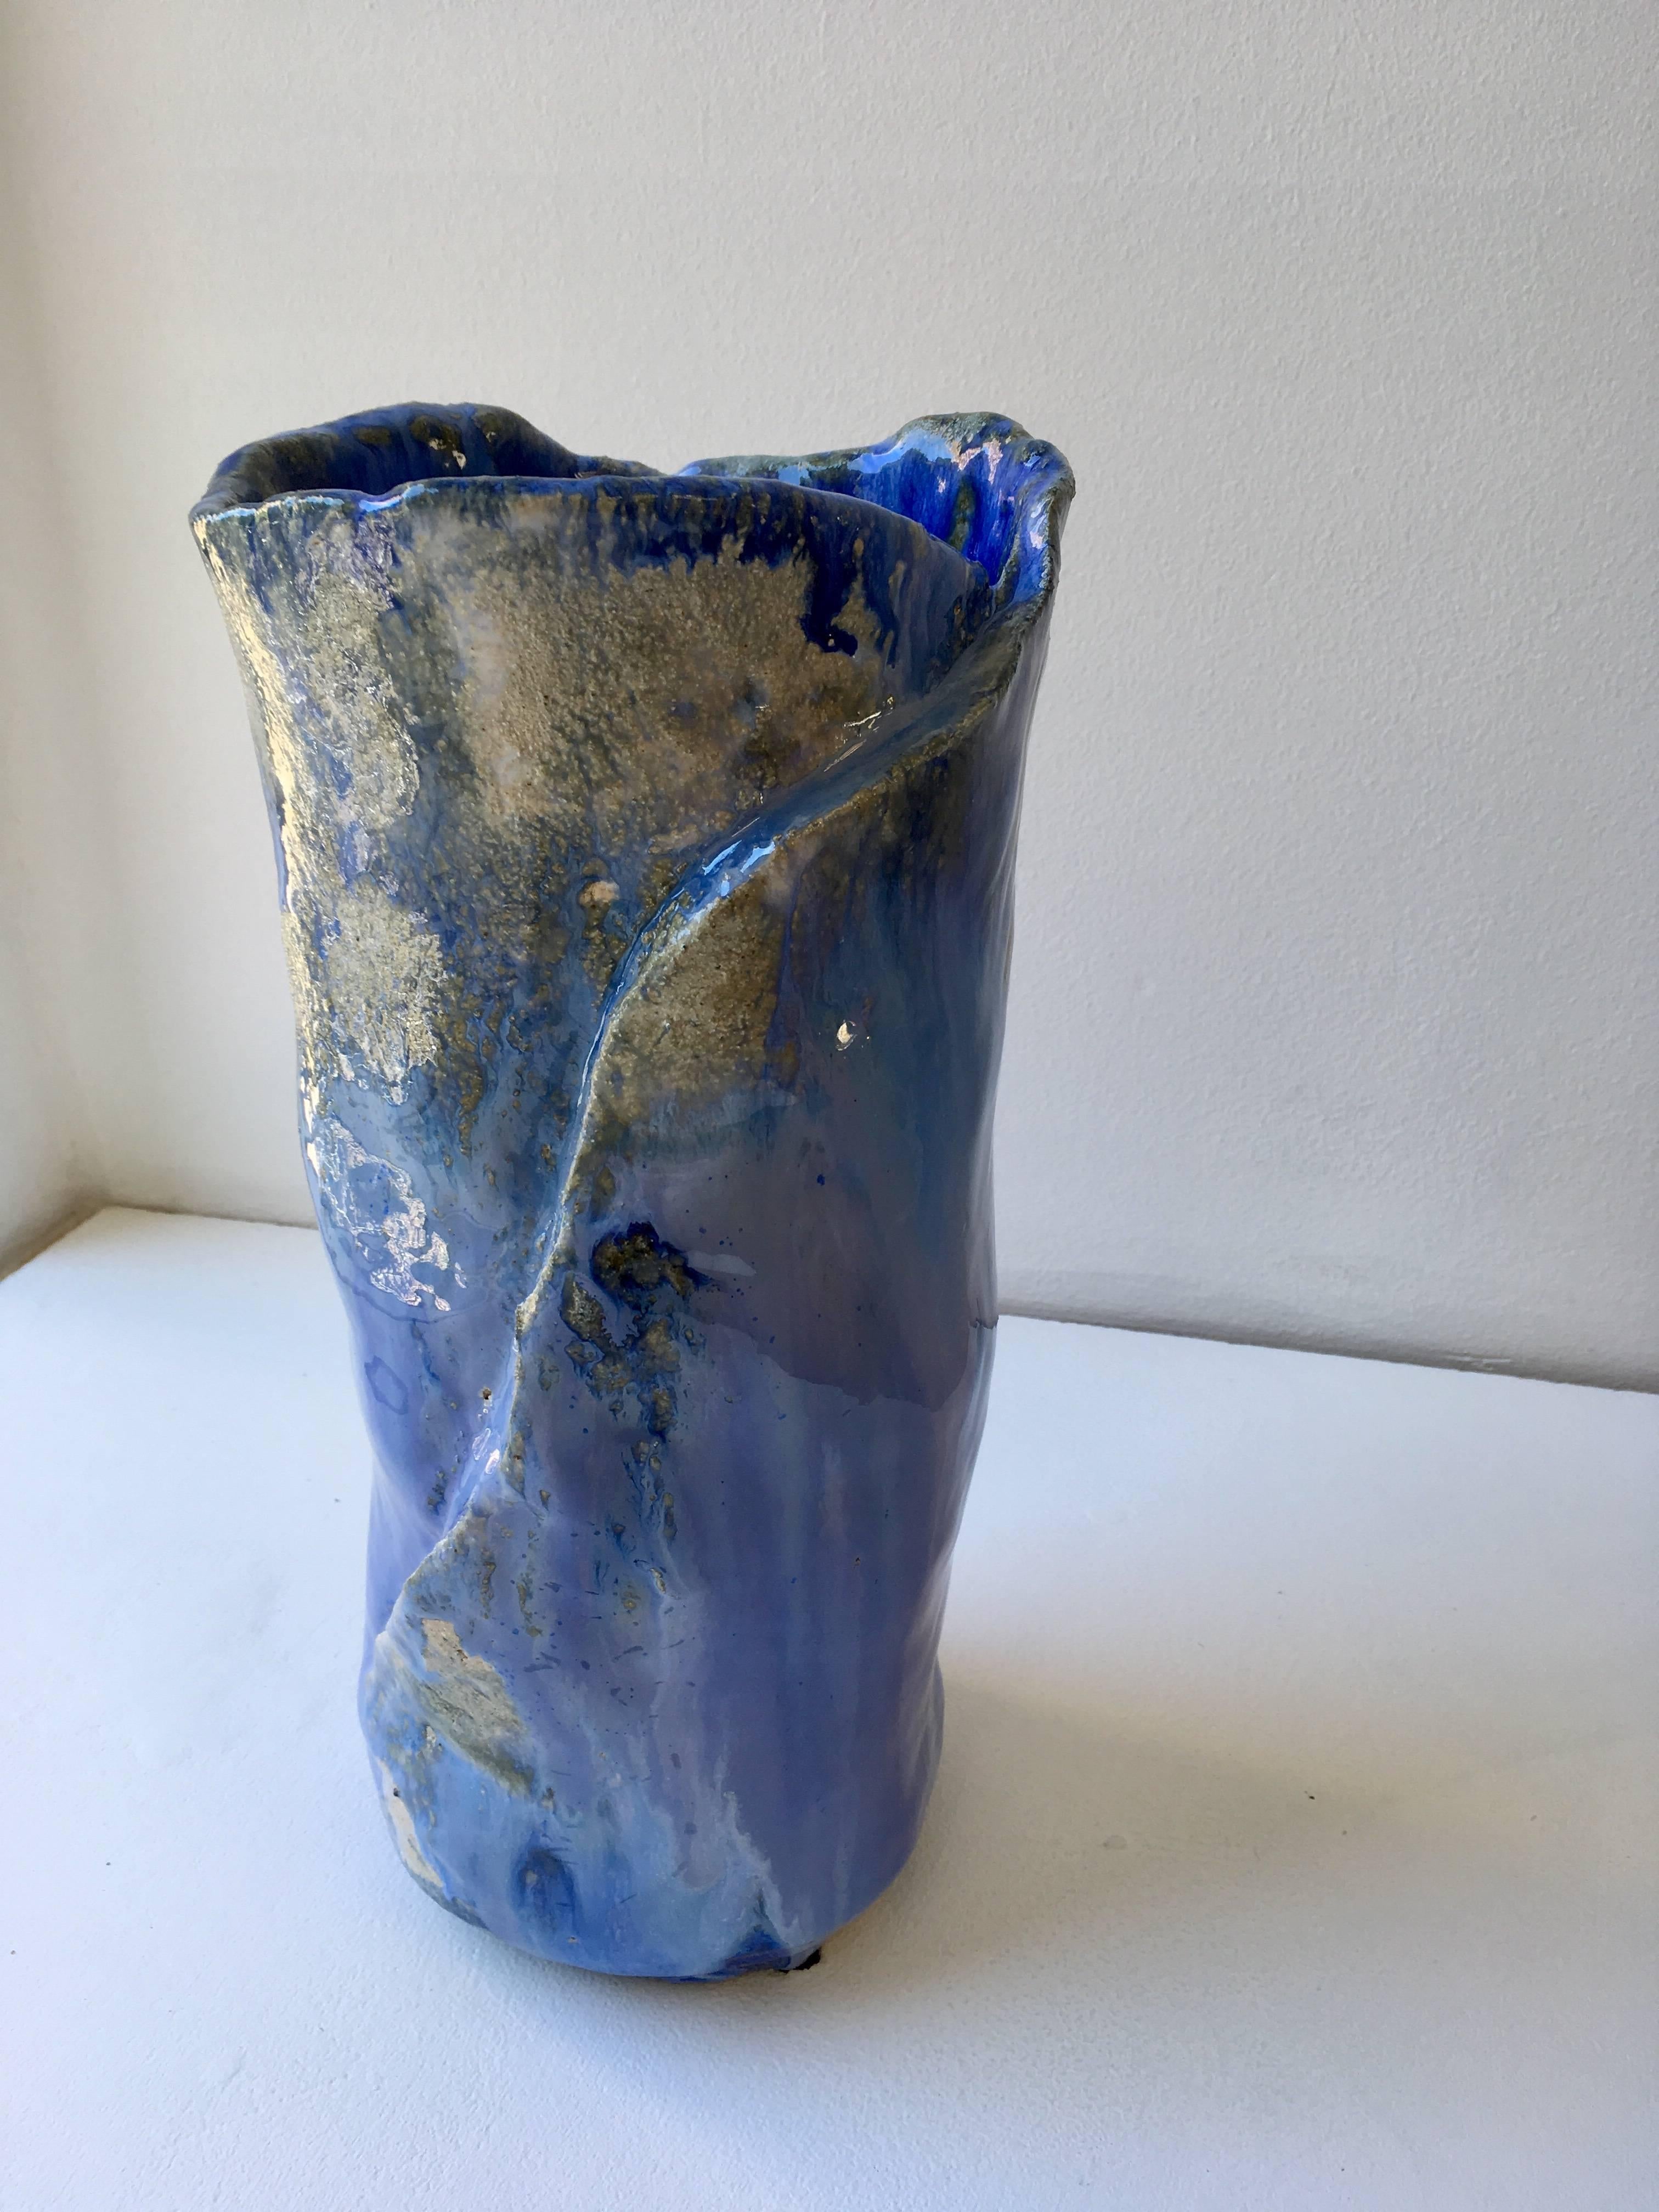 Ceramic vase from Superpoly.

For their solo exhibition 